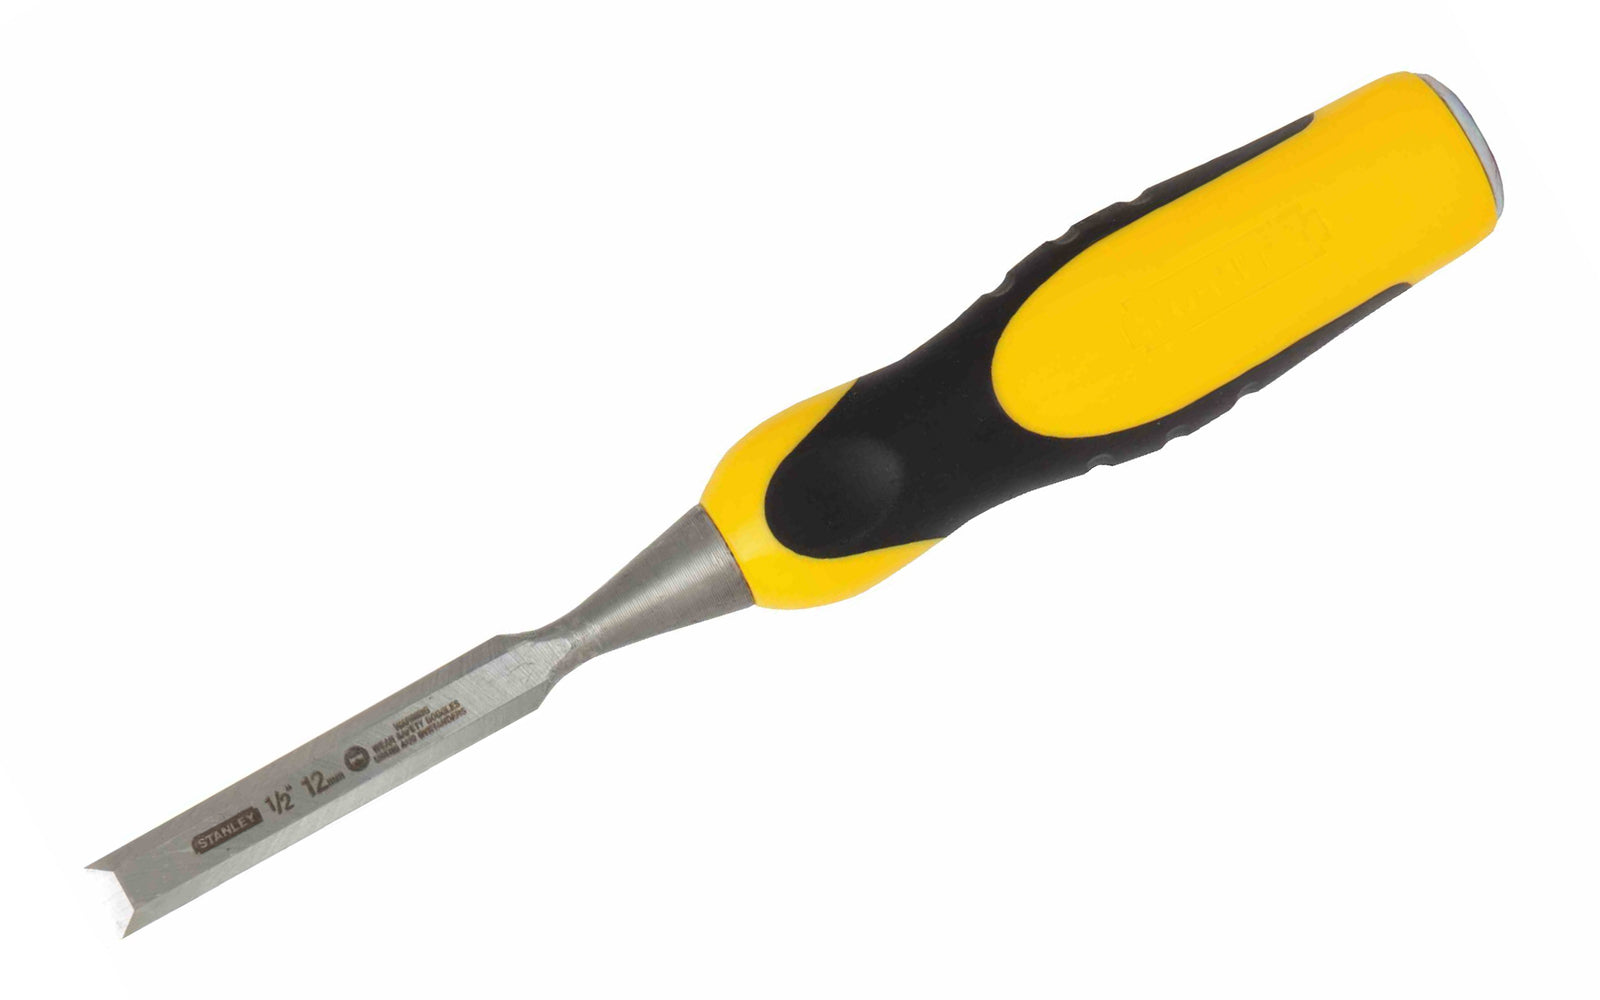 Stanley 1/2" (12 mm) Wood Chisel ~ 16-308 - High-carbon chrome steel - hardened & tempered